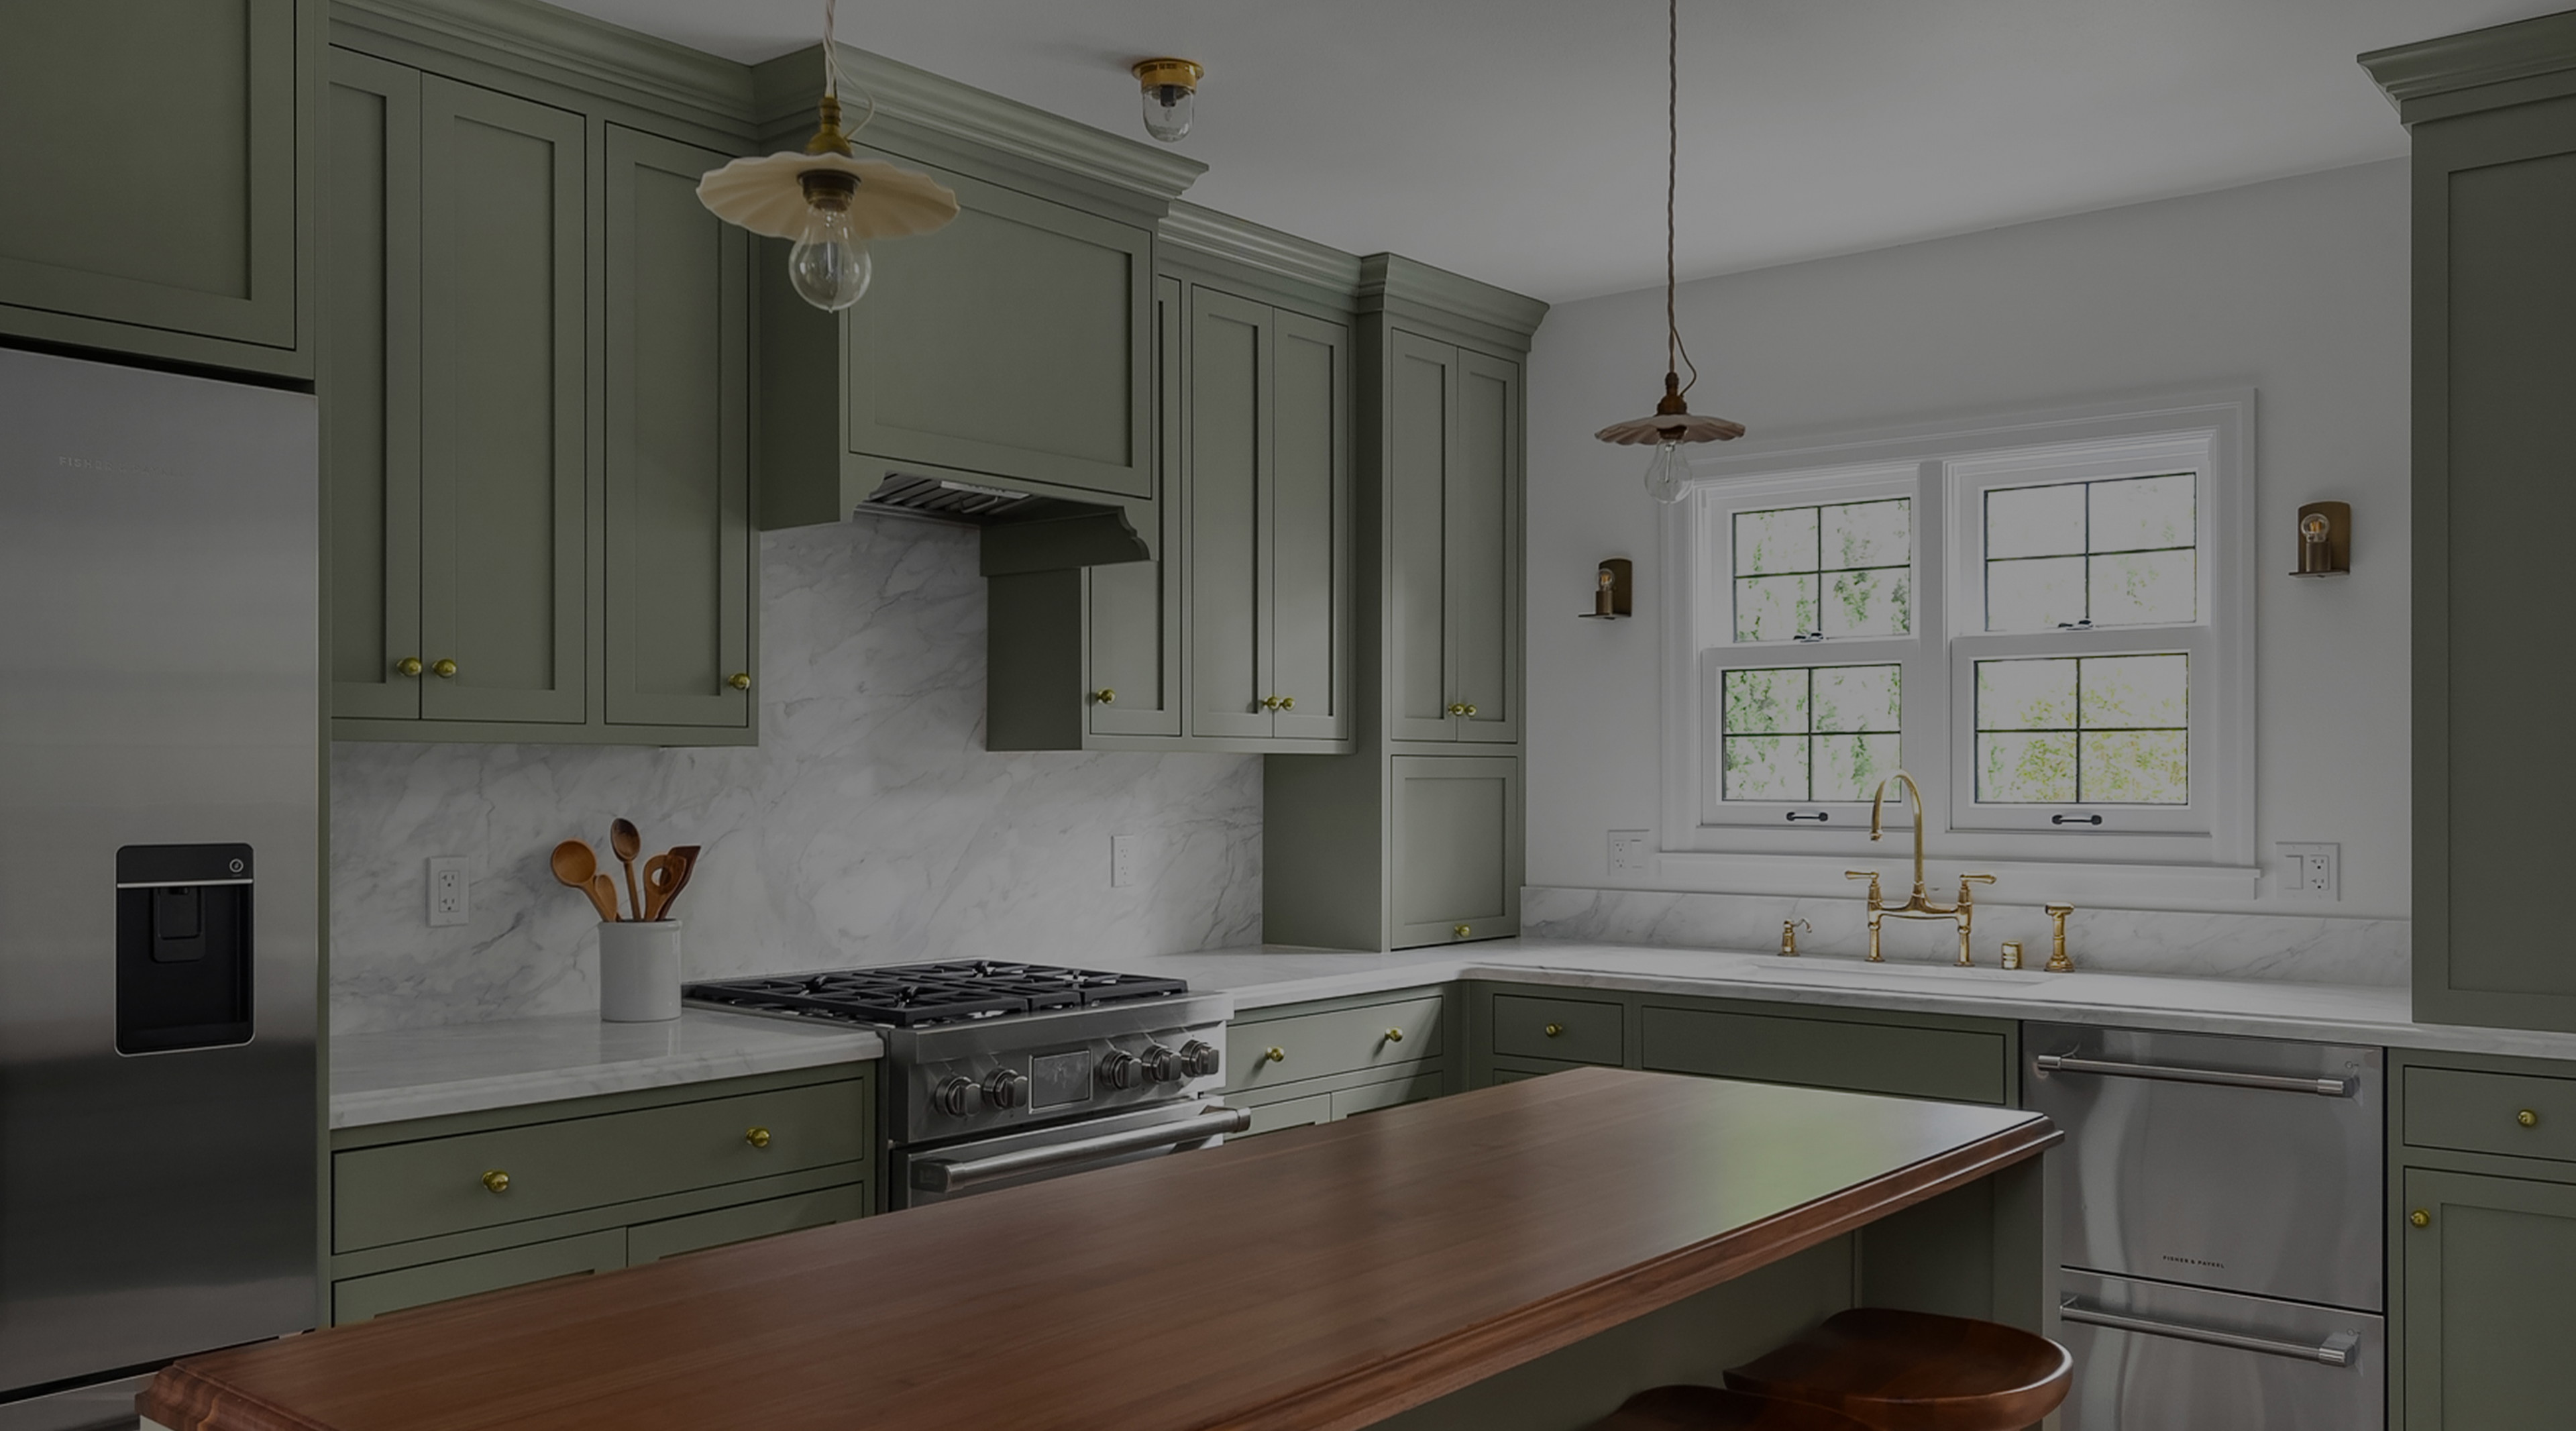 a kitchen with green cabinets and wooden counter tops